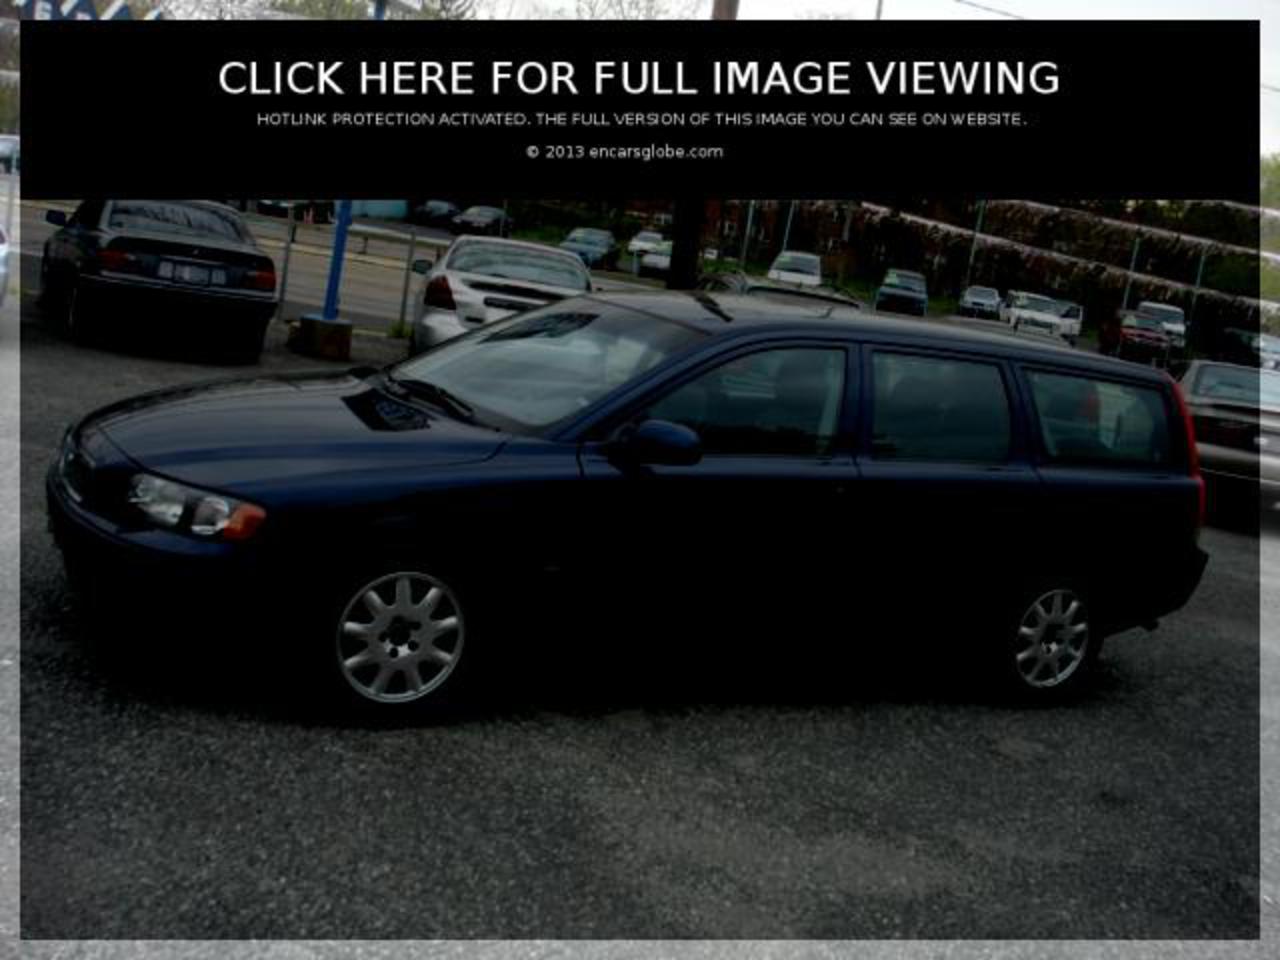 Volvo V70 ASR: Photo gallery, complete information about model ...